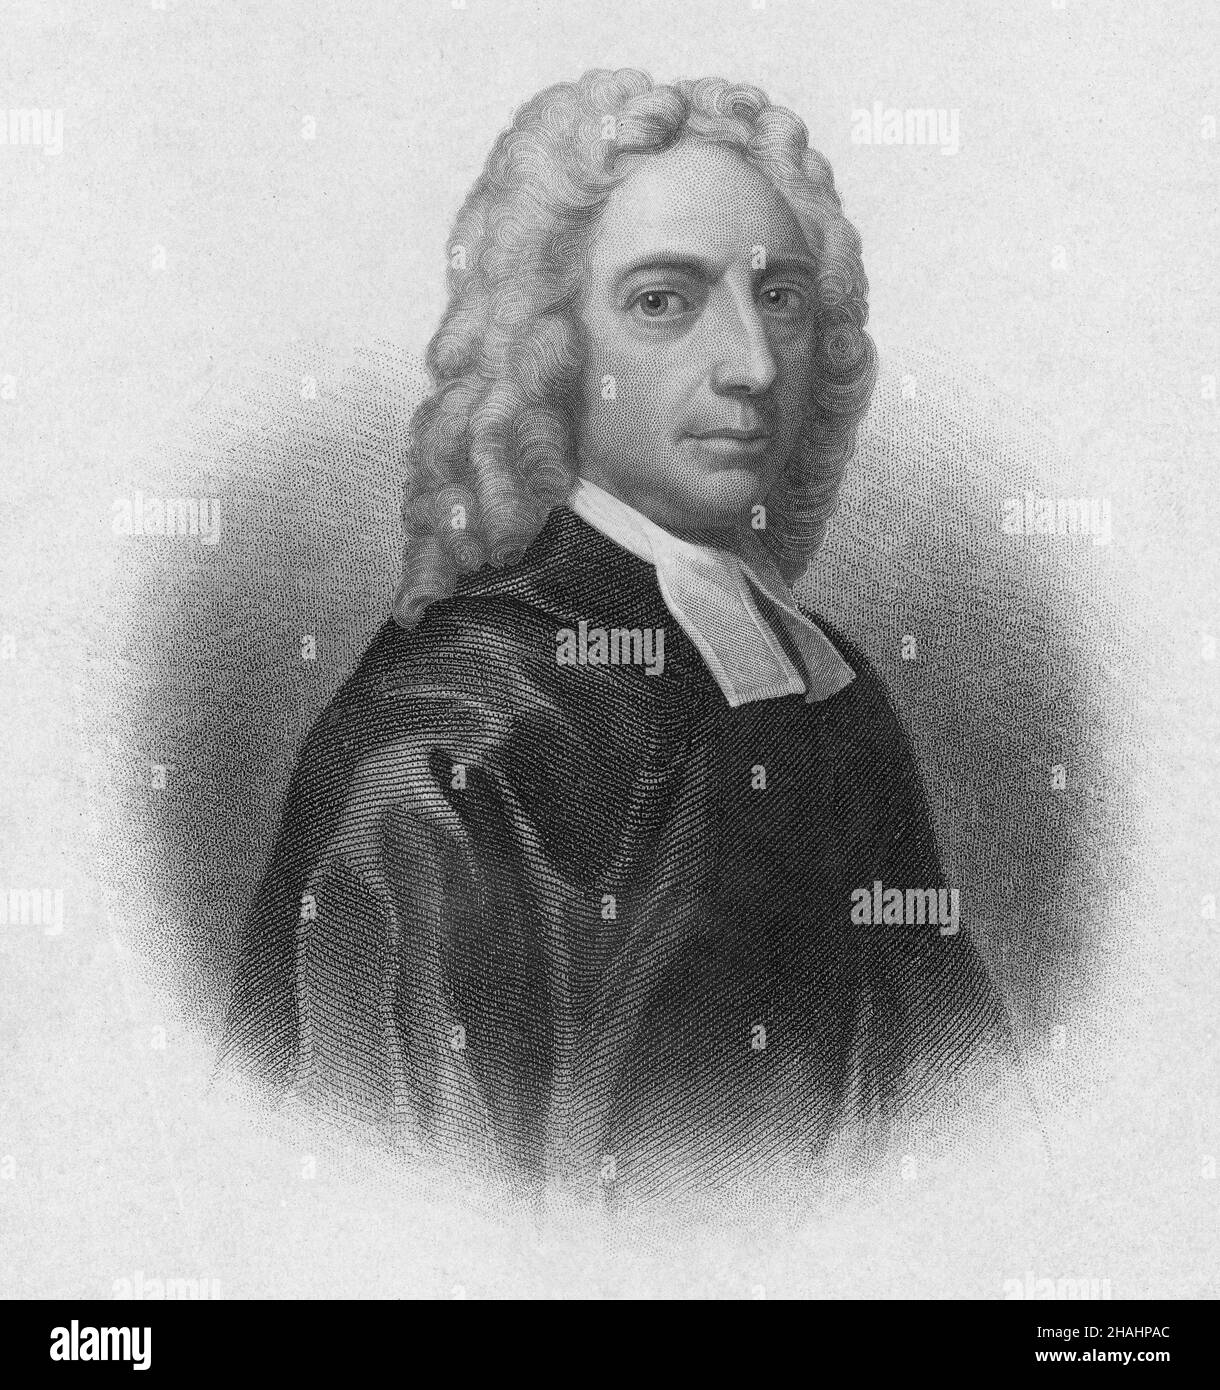 Antique circa 1870 engraving of Isaac Watts by Henry Bryan Hall (New York). Isaac Watts (1674-1748) was an English Congregational minister, hymn writer, theologian, and logician. SOURCE: ORIGINAL ENGRAVING Stock Photo